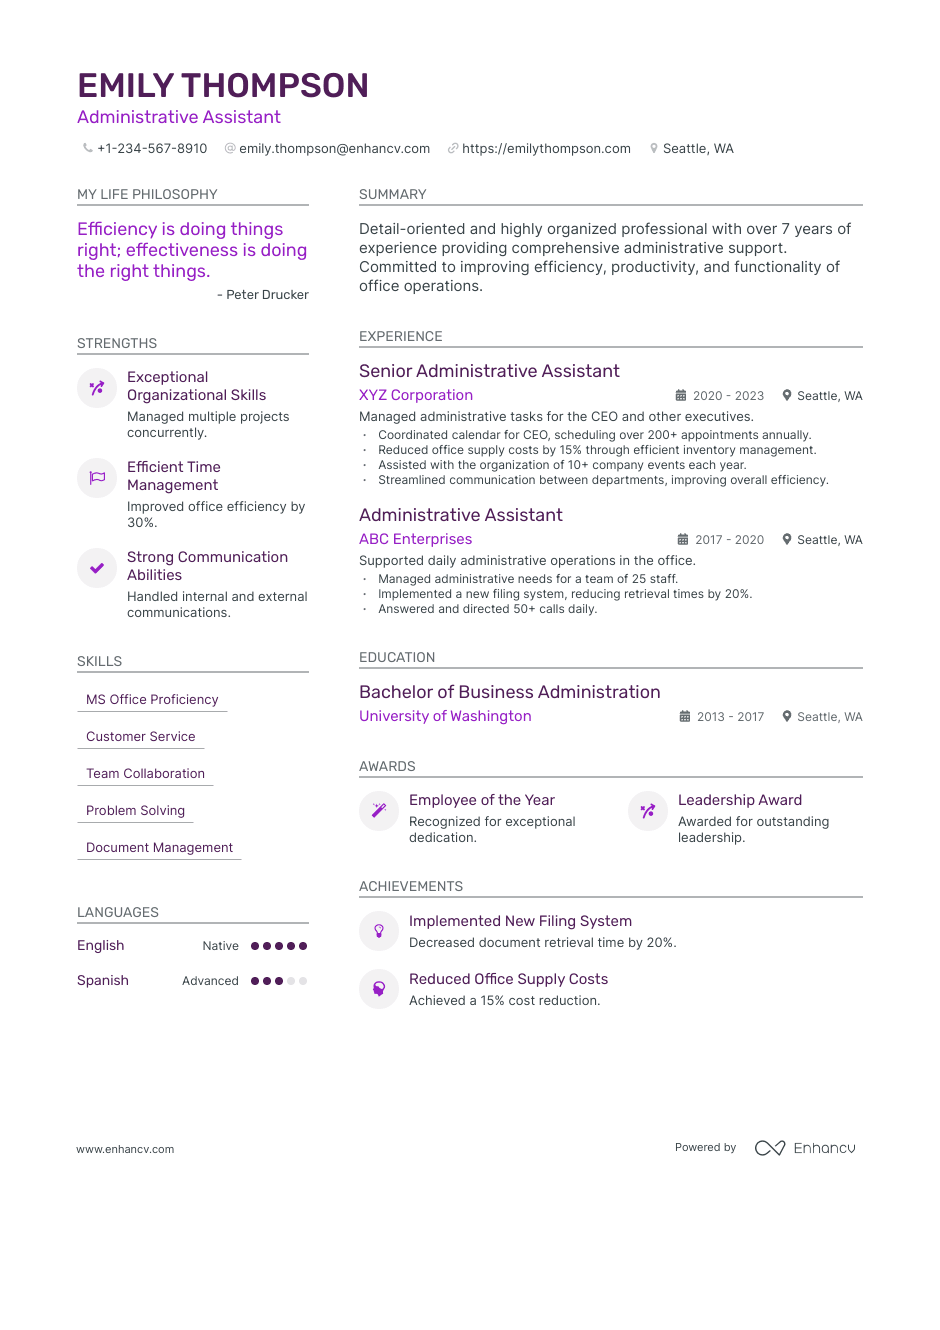 Administrative Assistant resume example